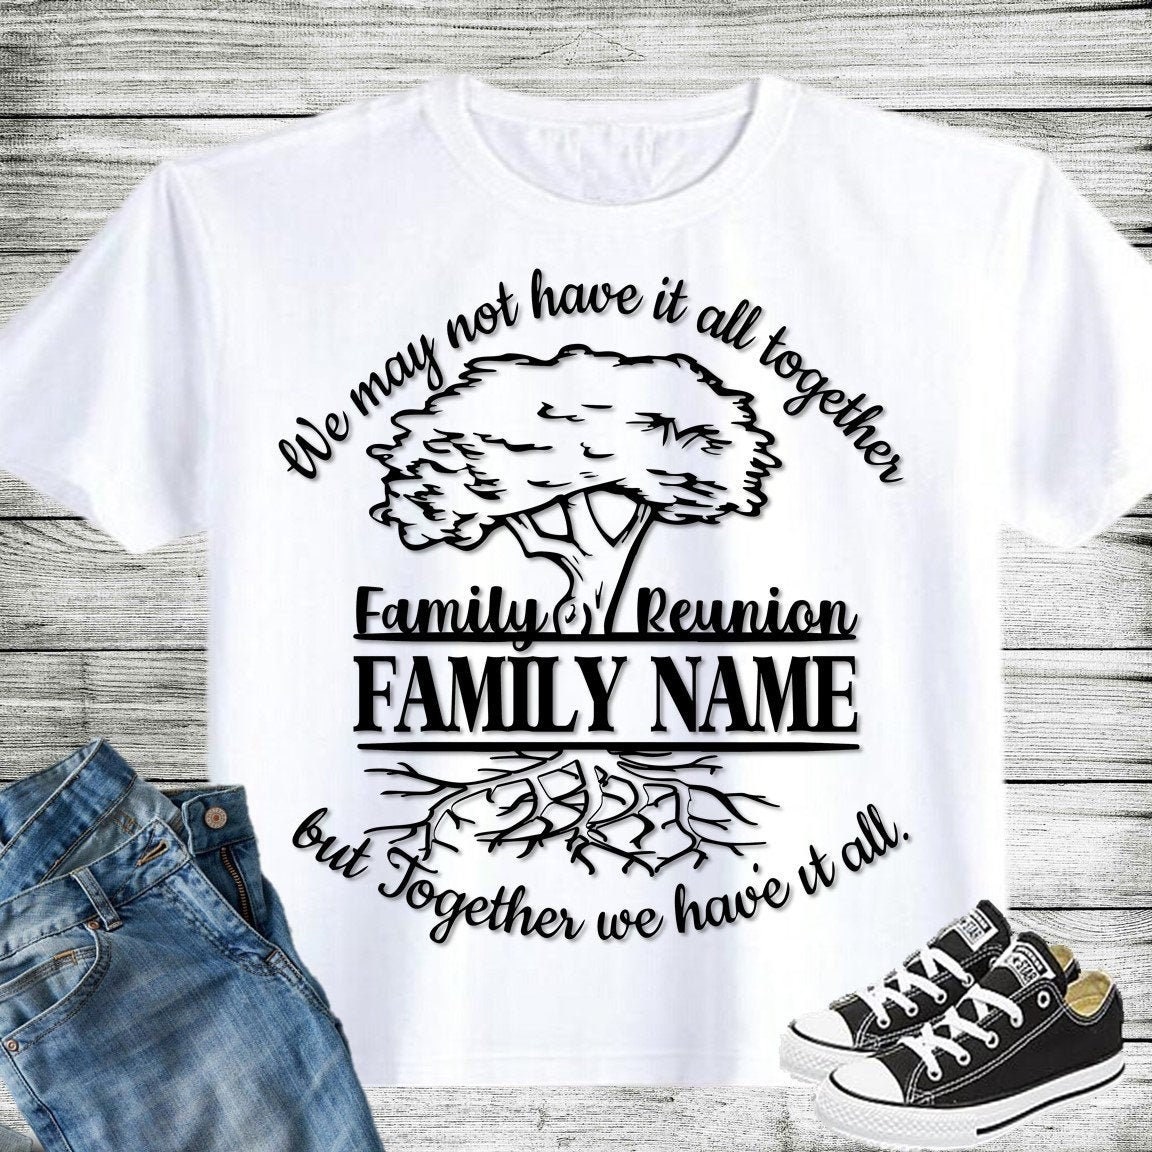 Screen Printed WHOLESALE T-shirts, Custom T-shirts, Personalized T-shirts  Family Reunion School Work Shirts Front & Back Printing 